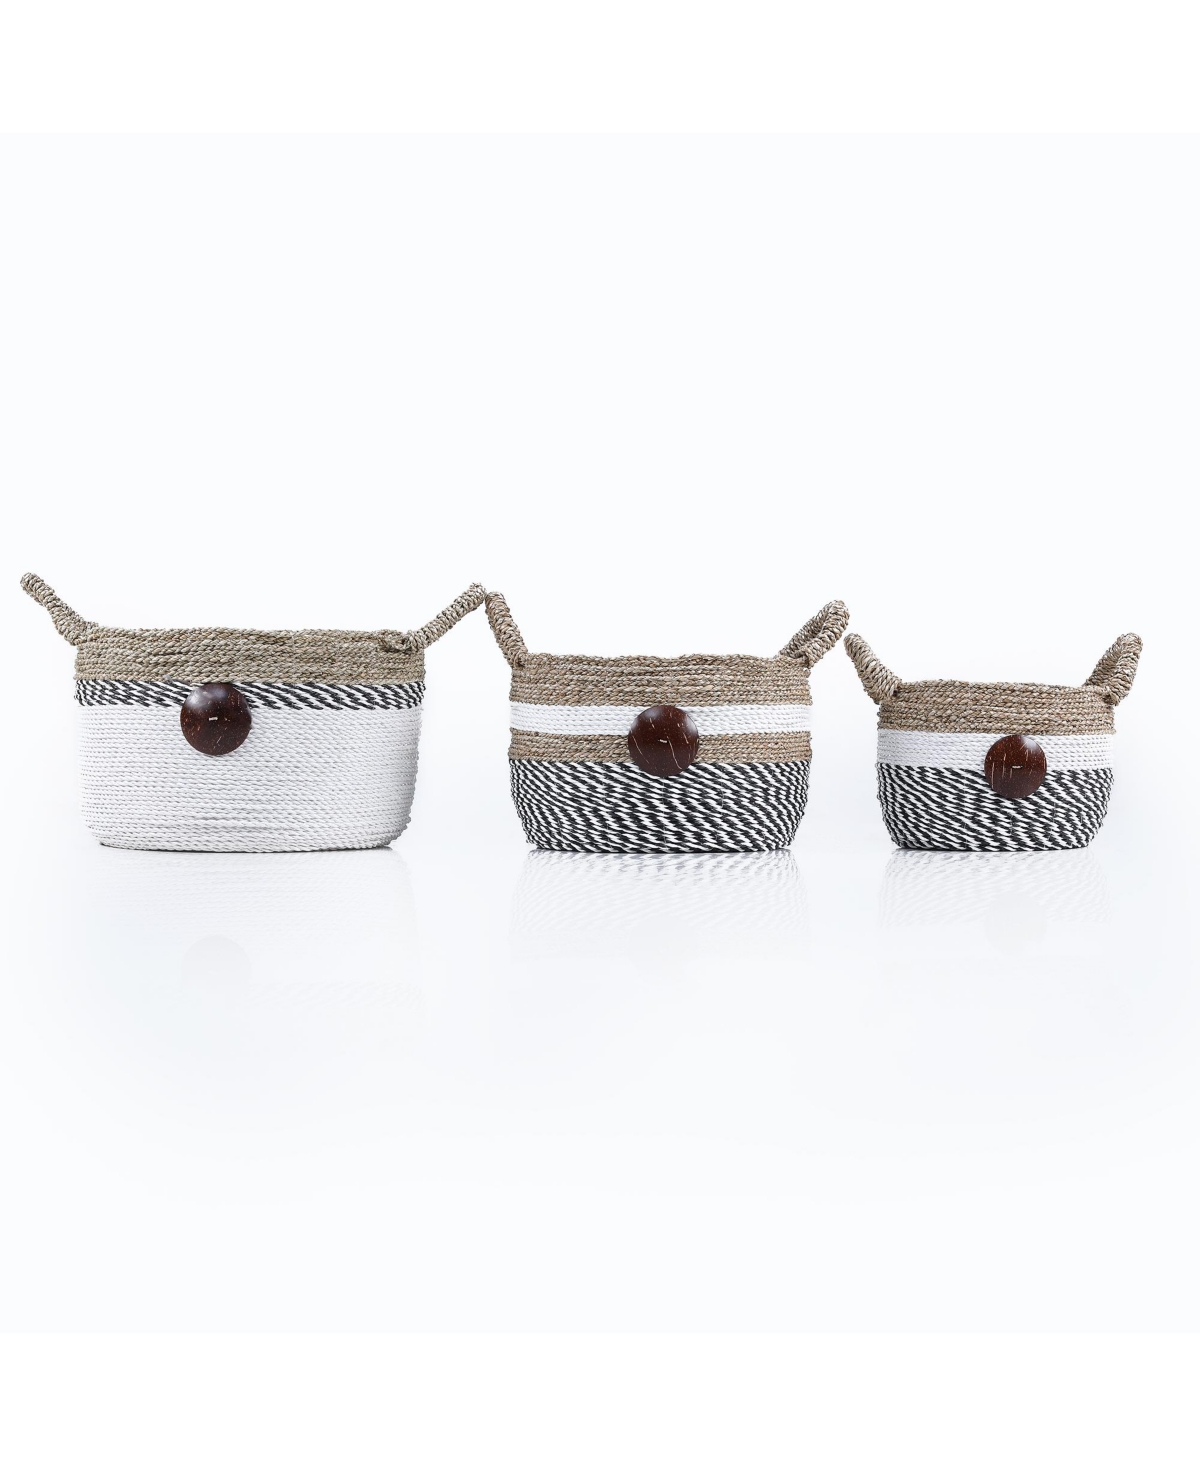 3 Piece Raffia and Sea Grass Storage Set with Coco Buttons and Ear Handles - Natural